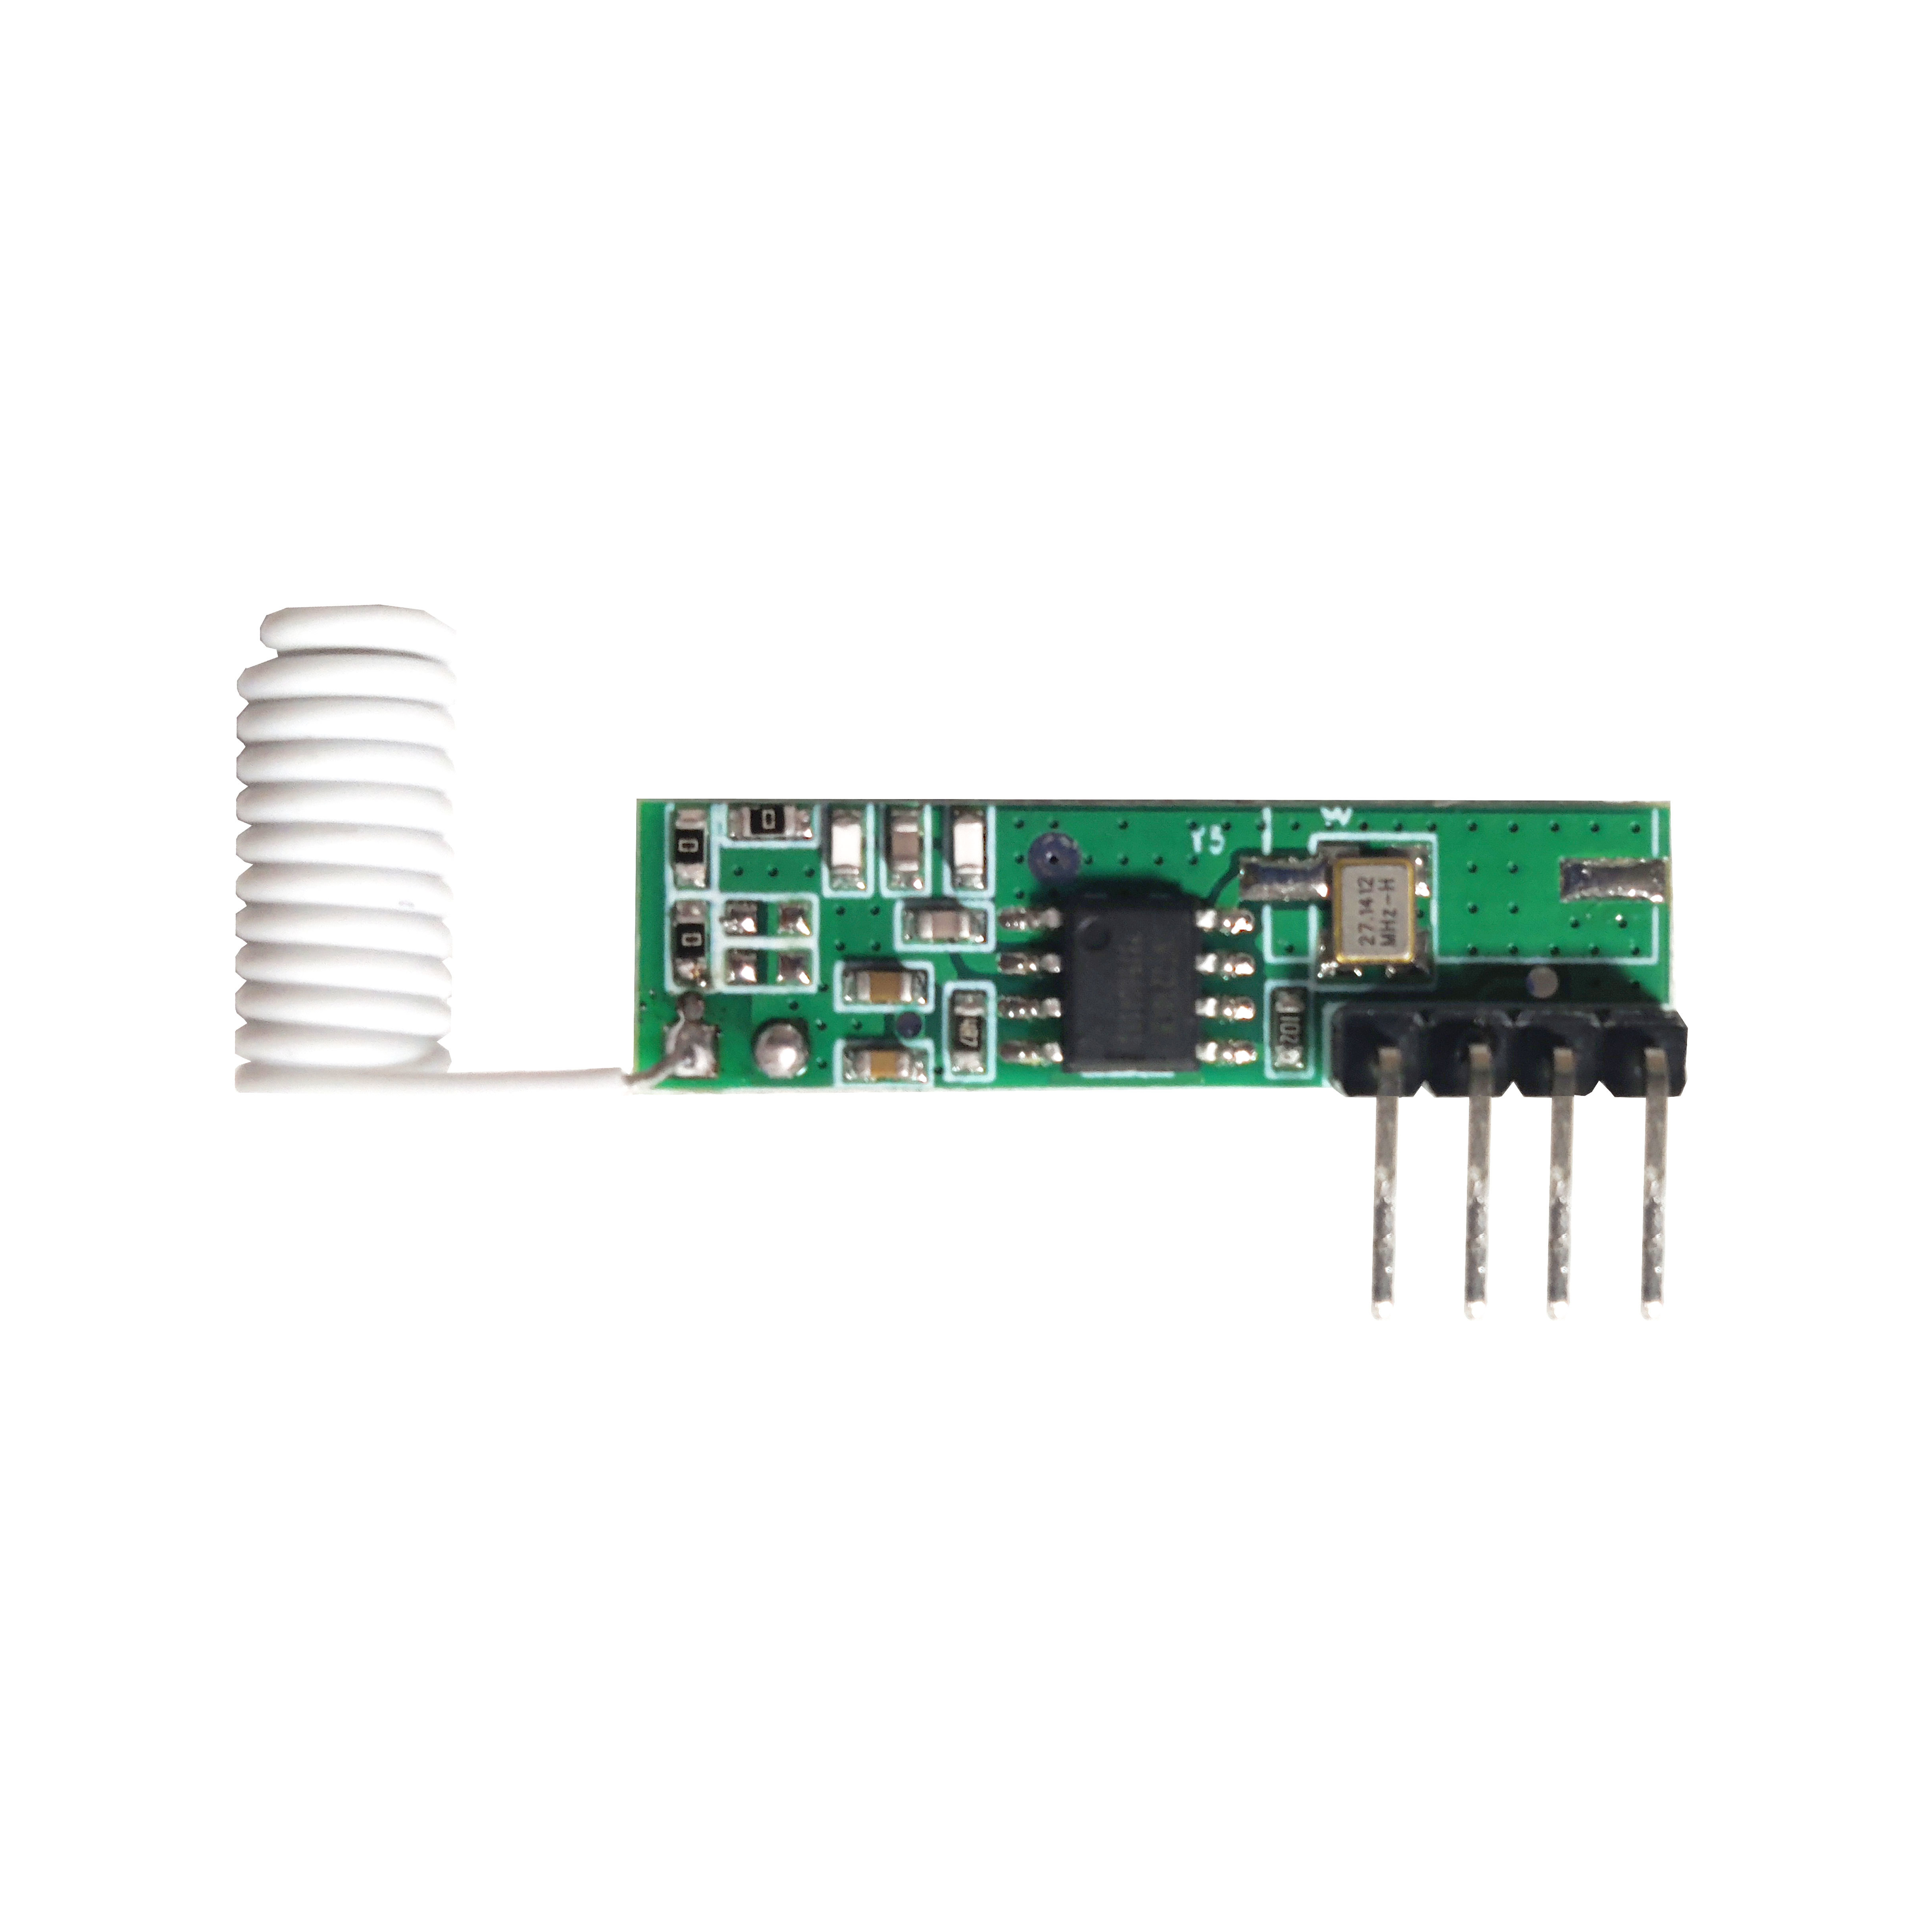 ASK/OOK Wide Voltage and High Sensitivity Receiver Module